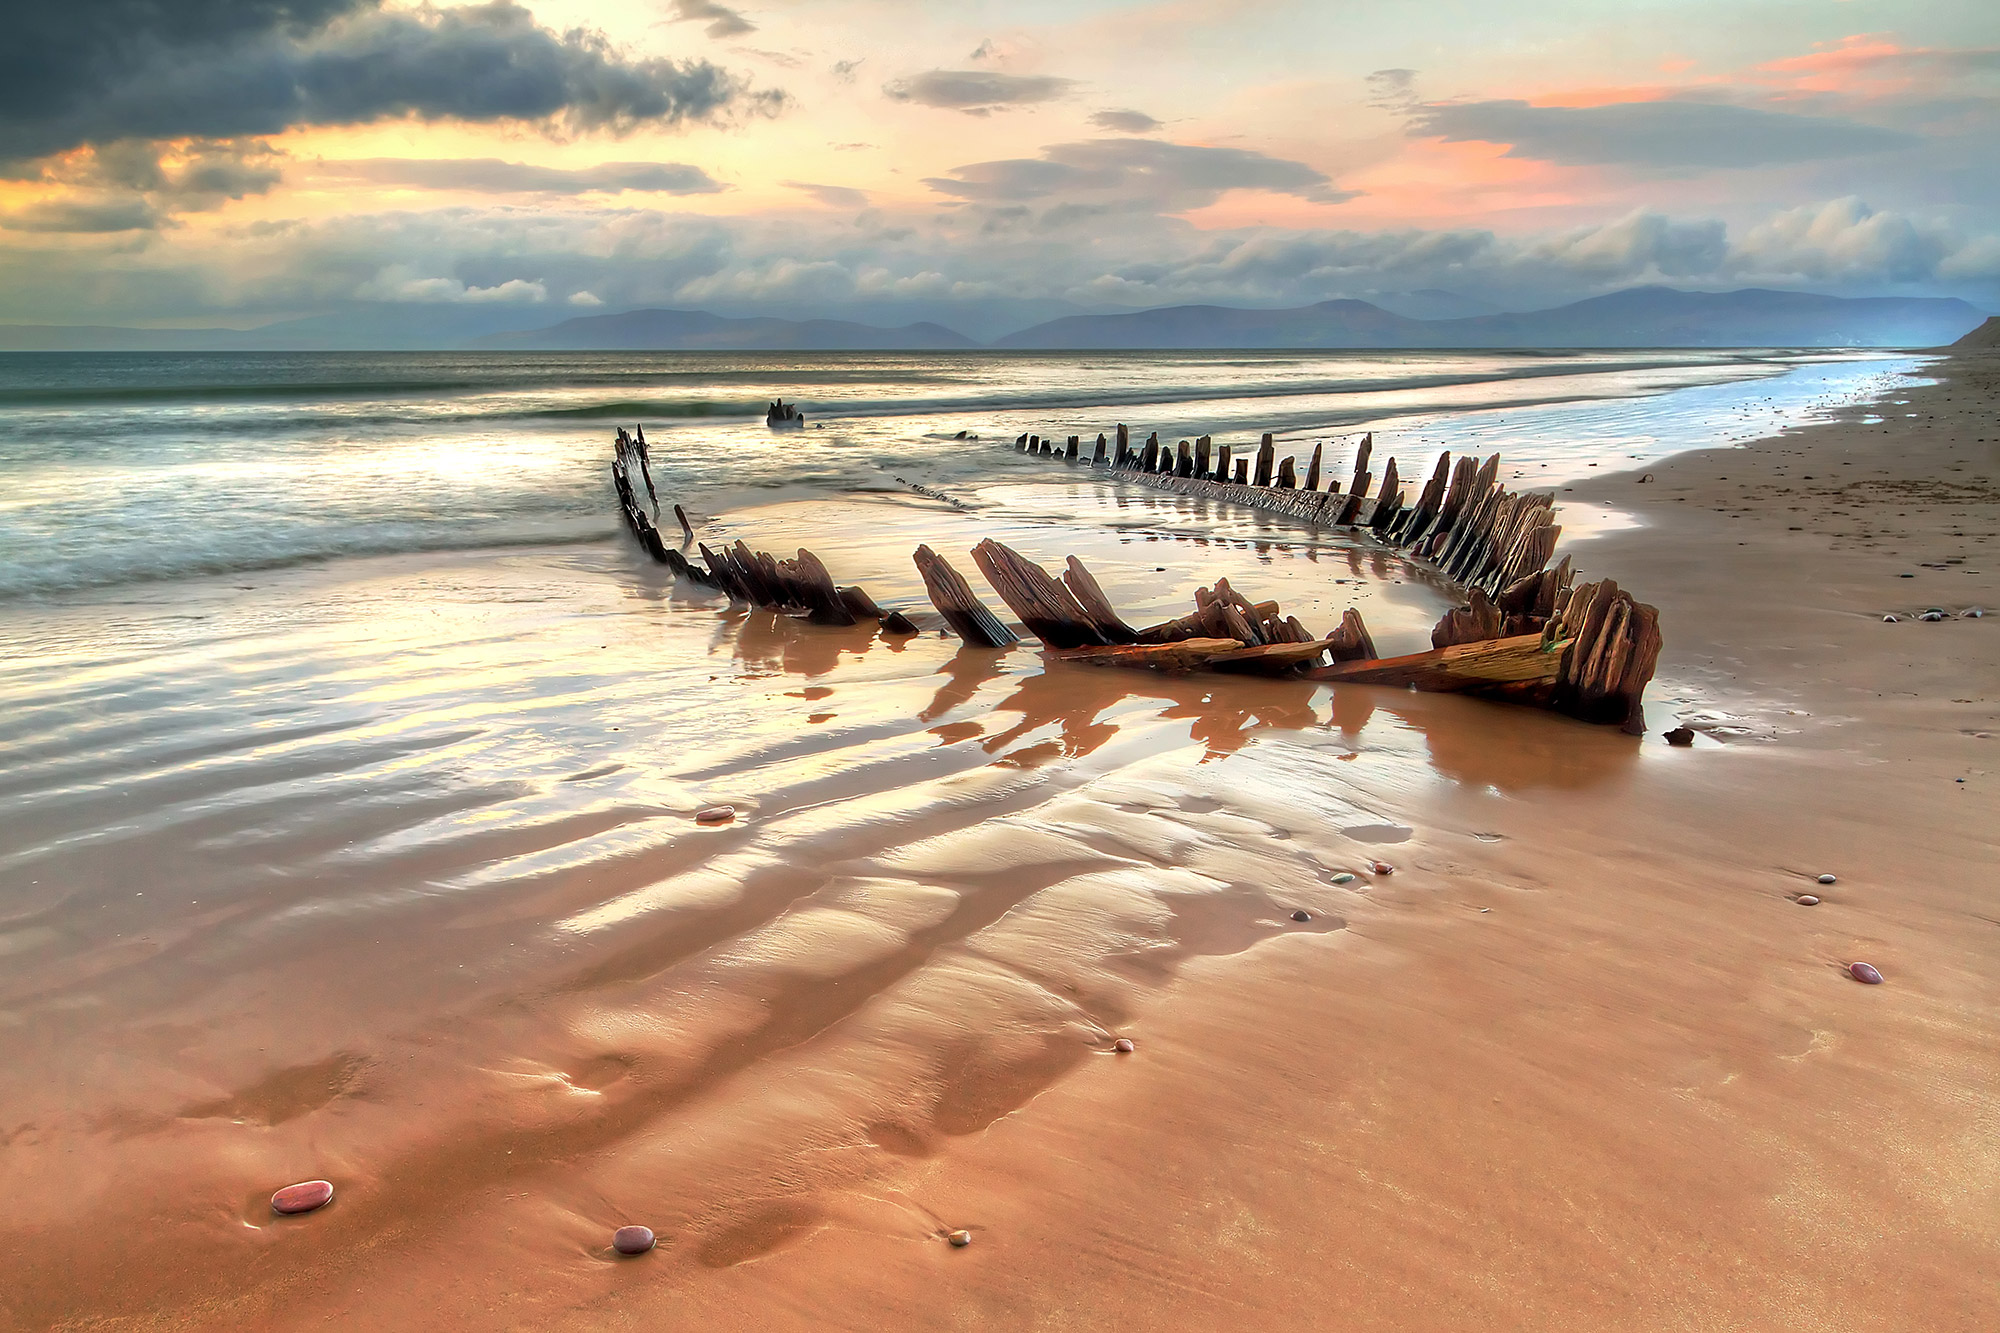 Skeleton of a ship on the beach